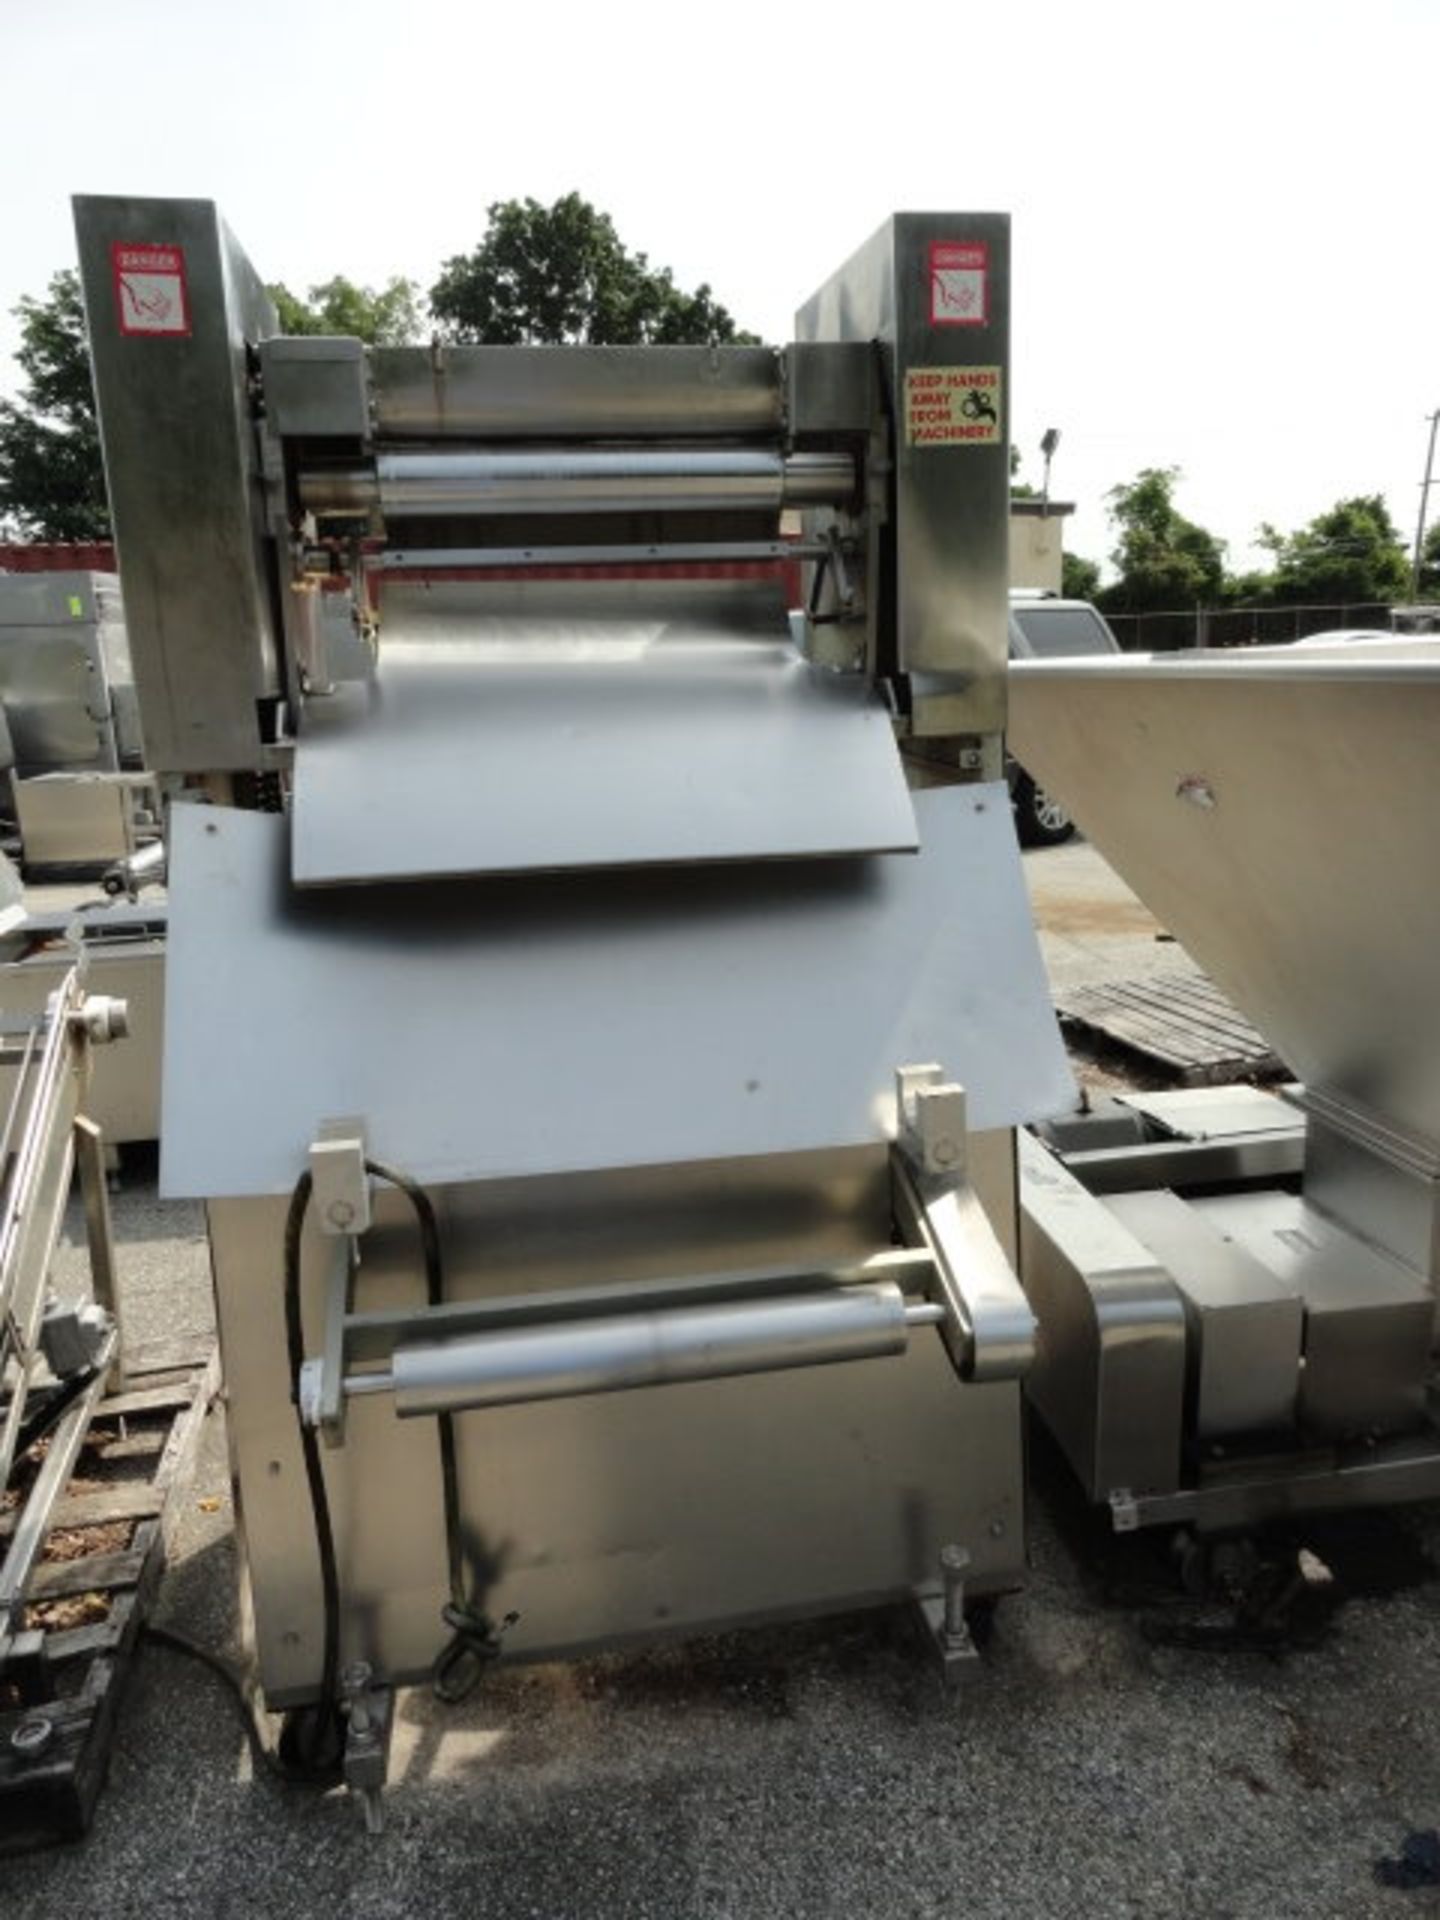 Stainless Steel Sheeting Section, 21" rollers, incomplete parts only, ($150.00 Required Loading Fee- - Image 2 of 2